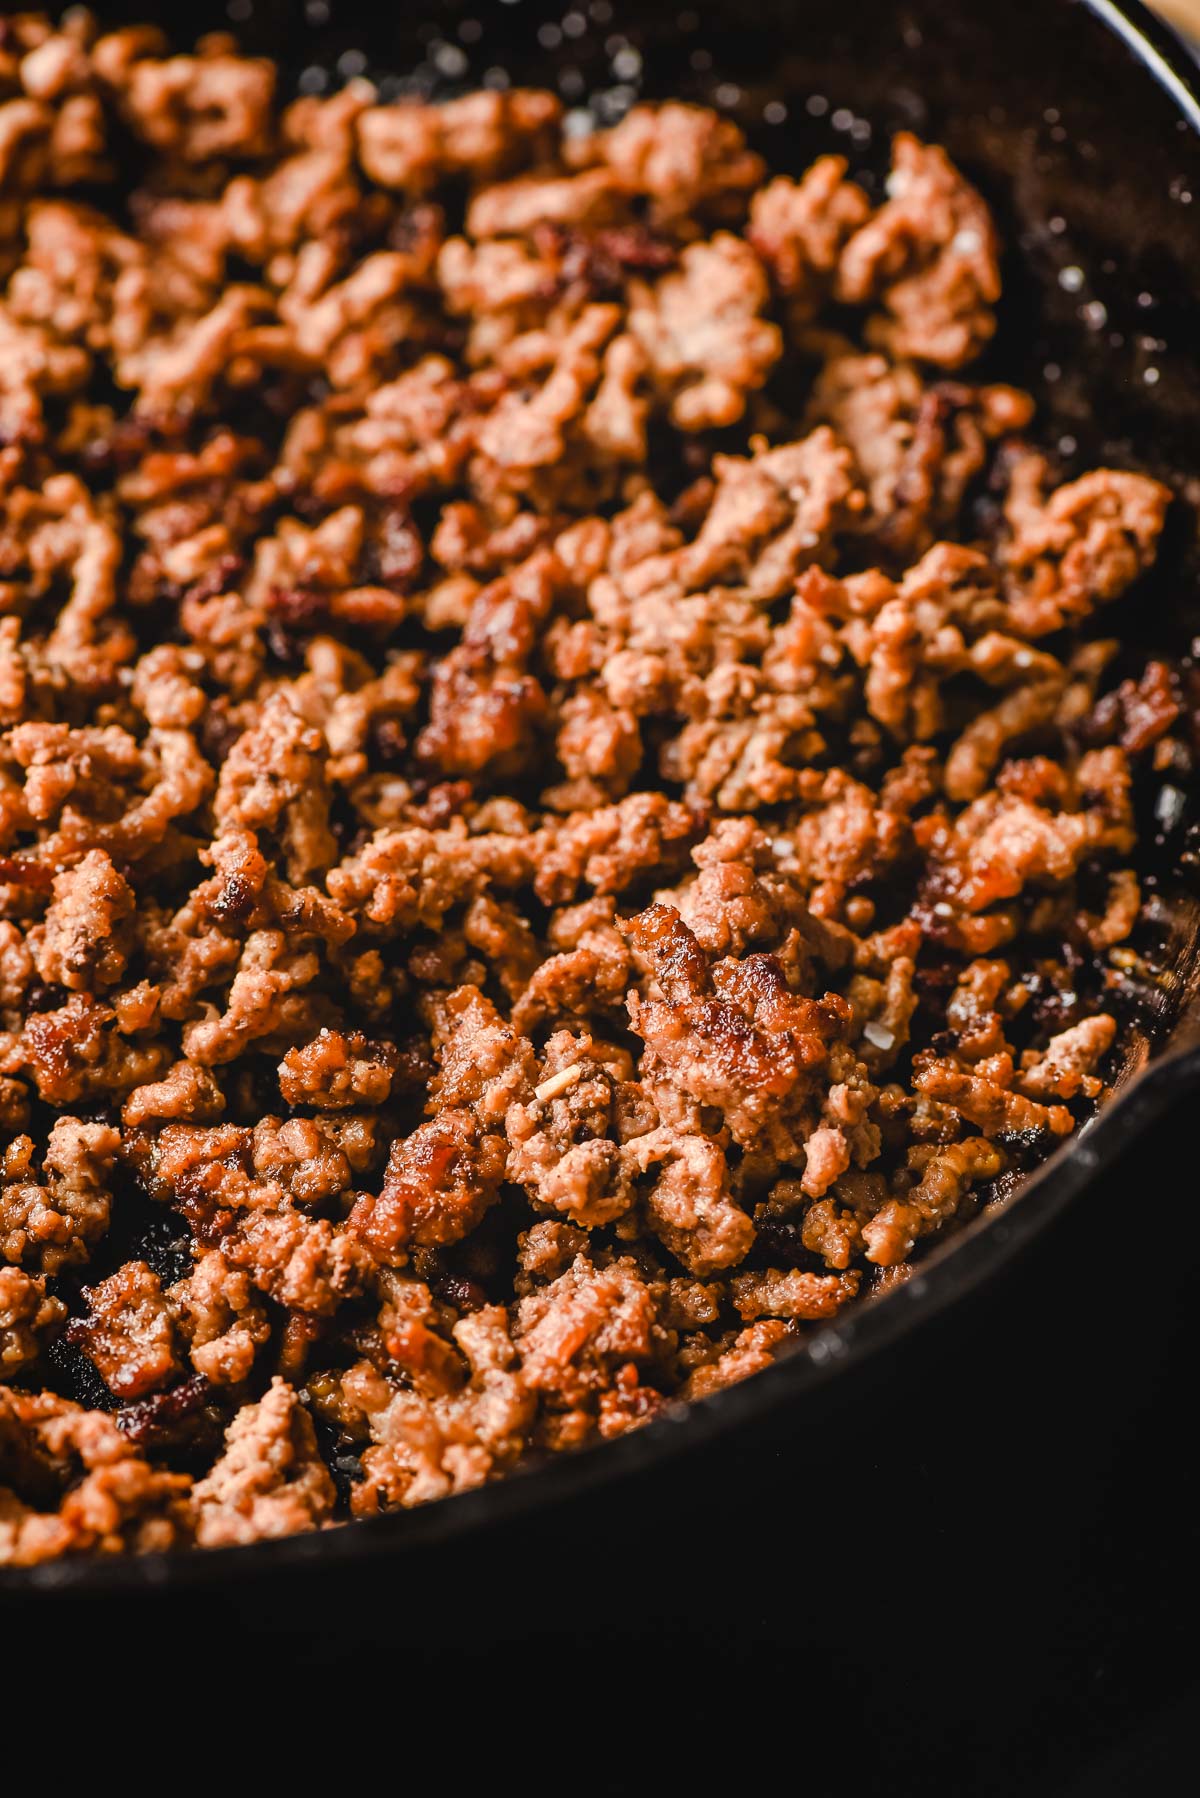 Crispy browned ground beef in a cast iron skillet.